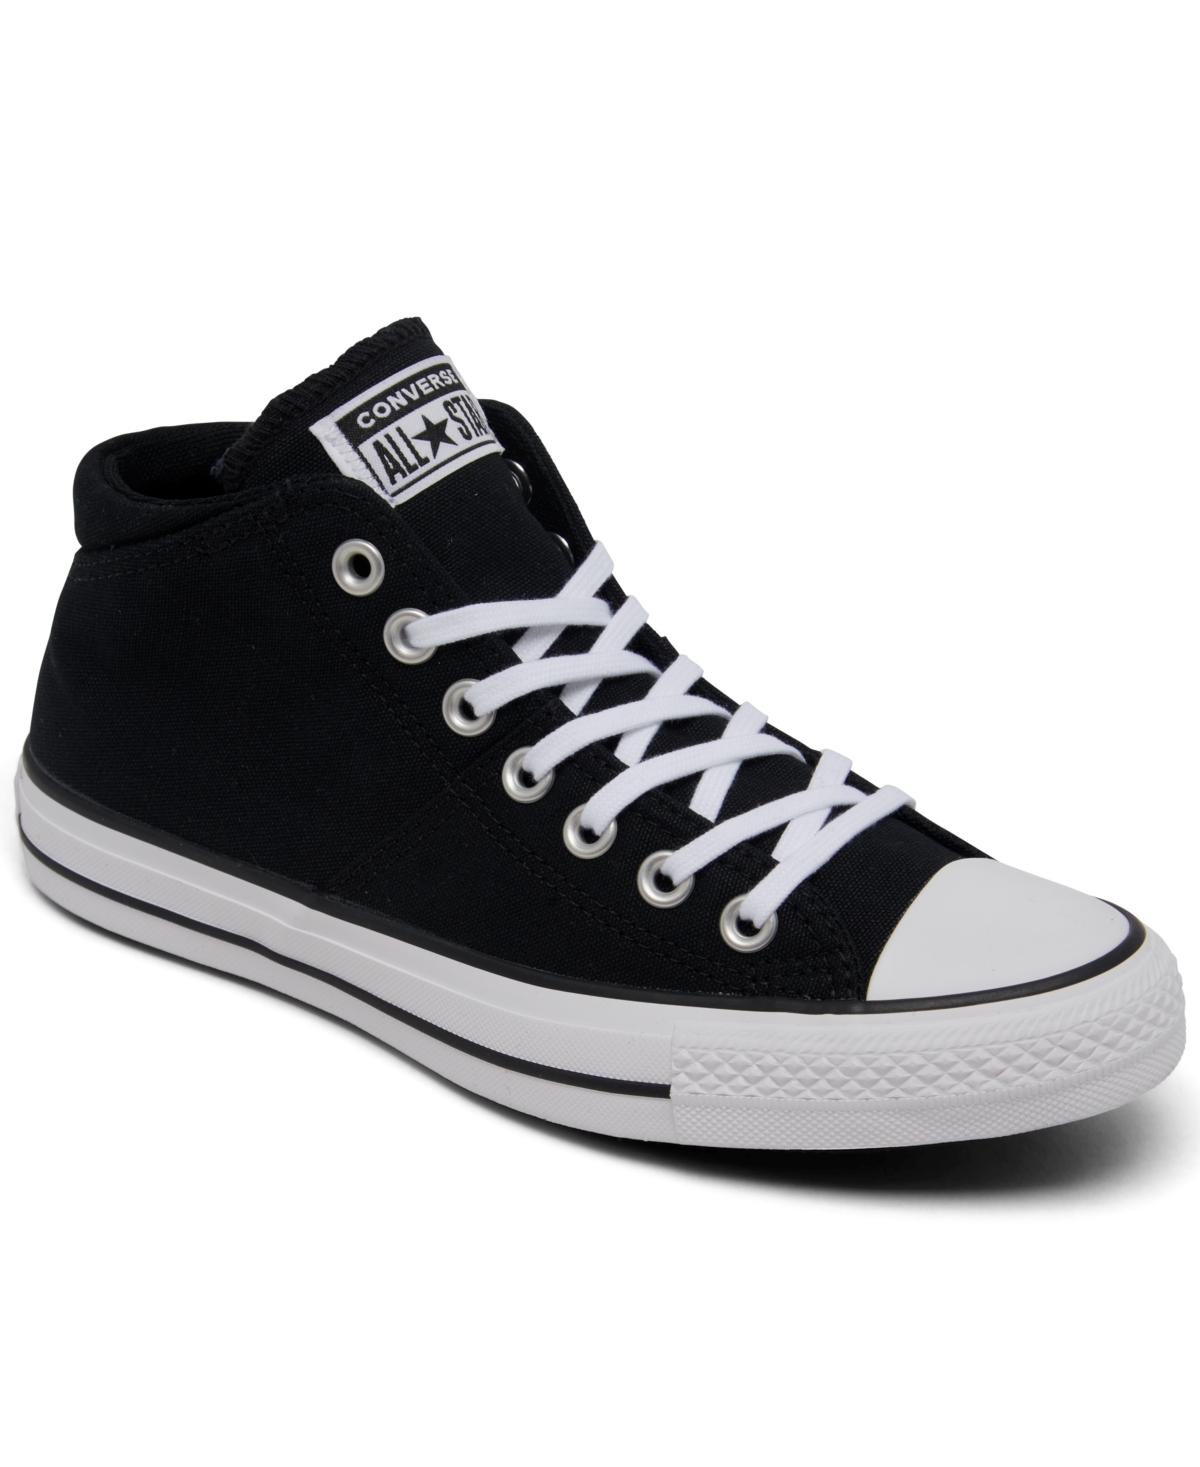 Converse Women's Chuck Taylor Madison Mid Casual Sneakers From Finish Line In Black,black,white